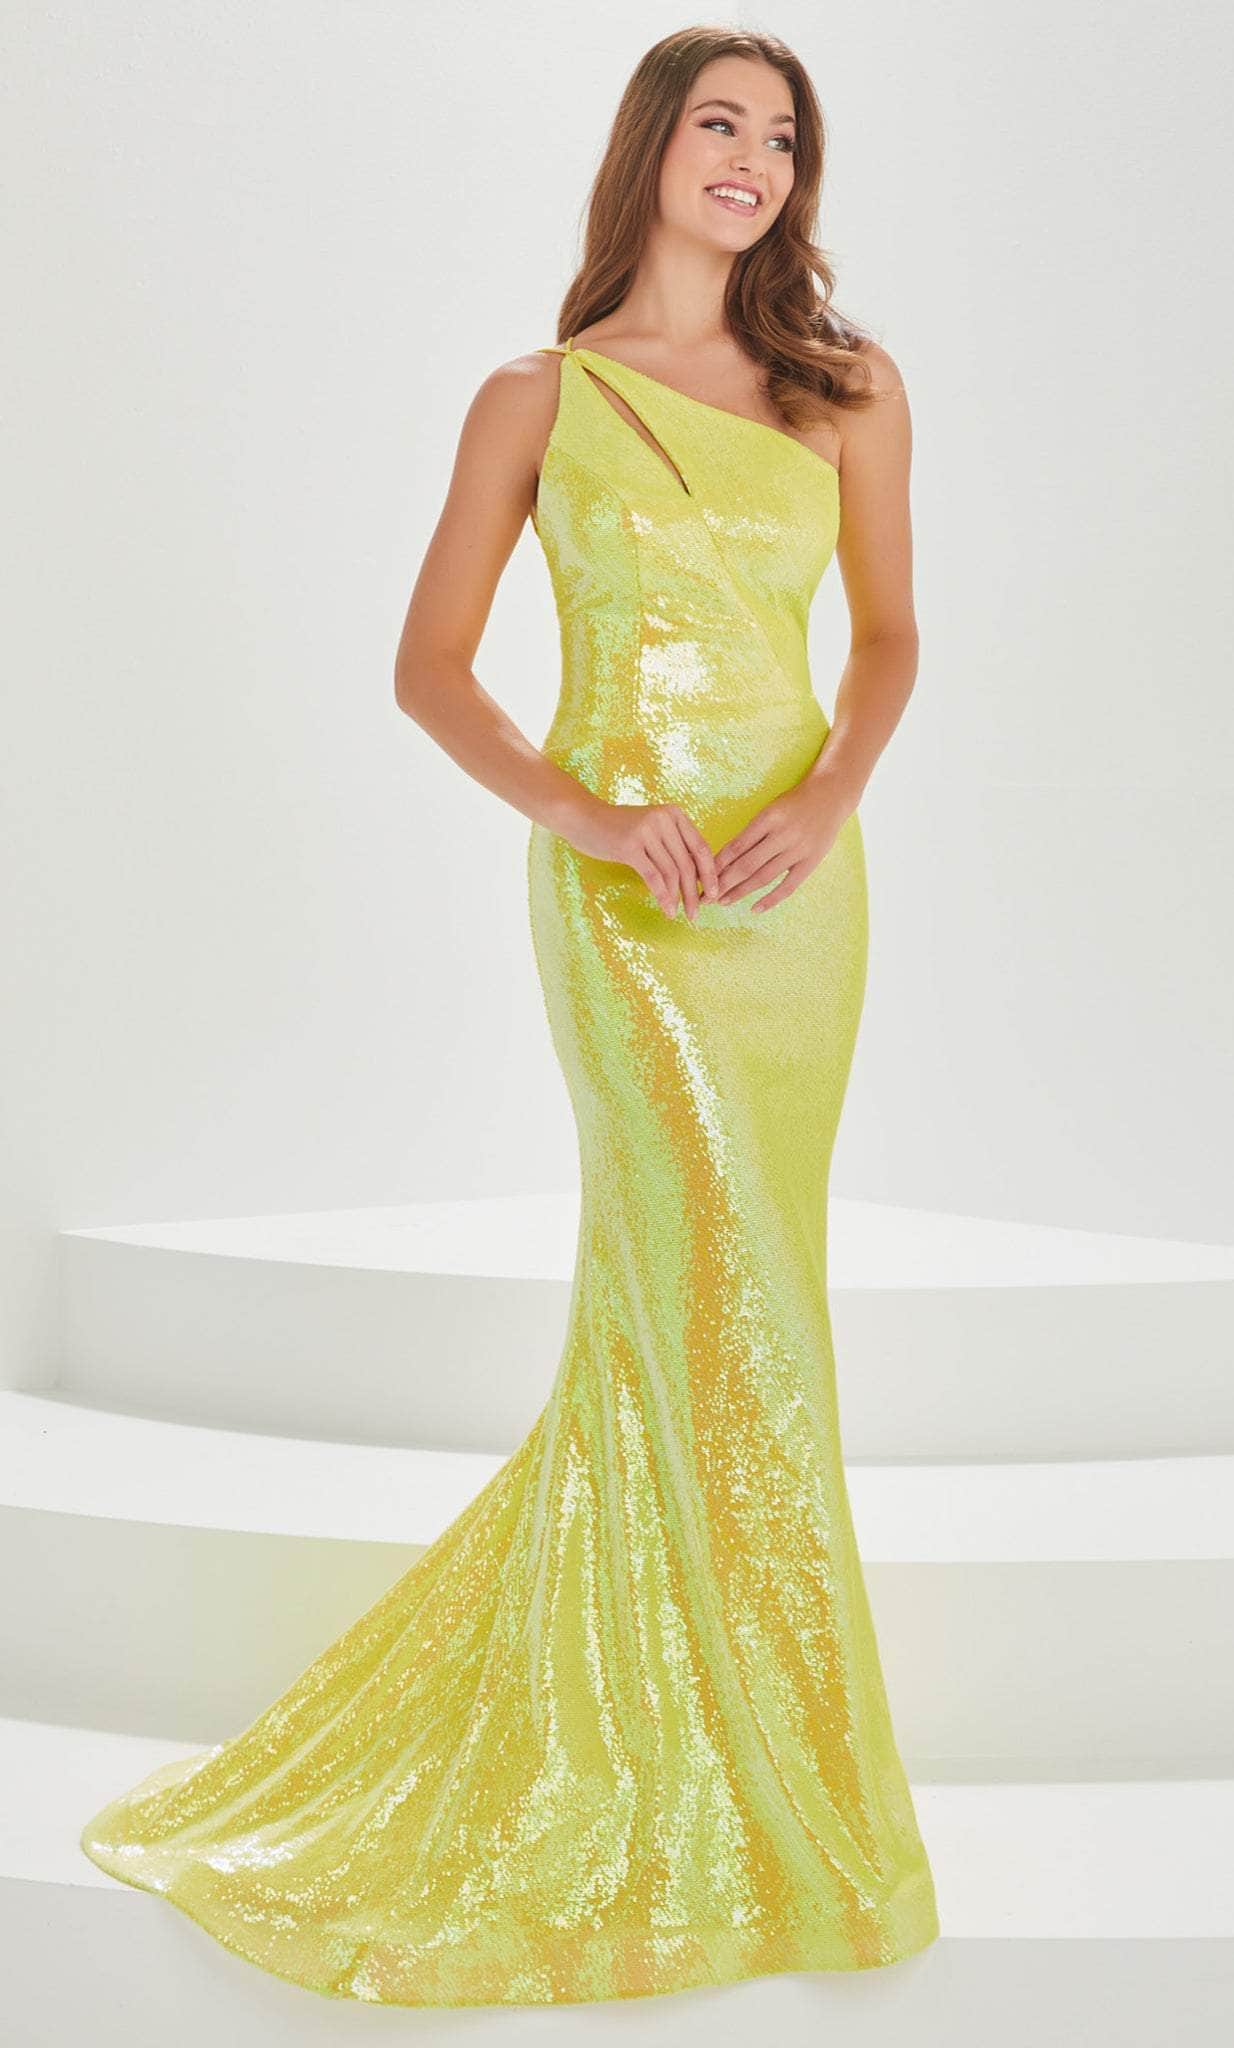 Tiffany Designs by Christina Wu 16006 - Sequined Prom Gown
